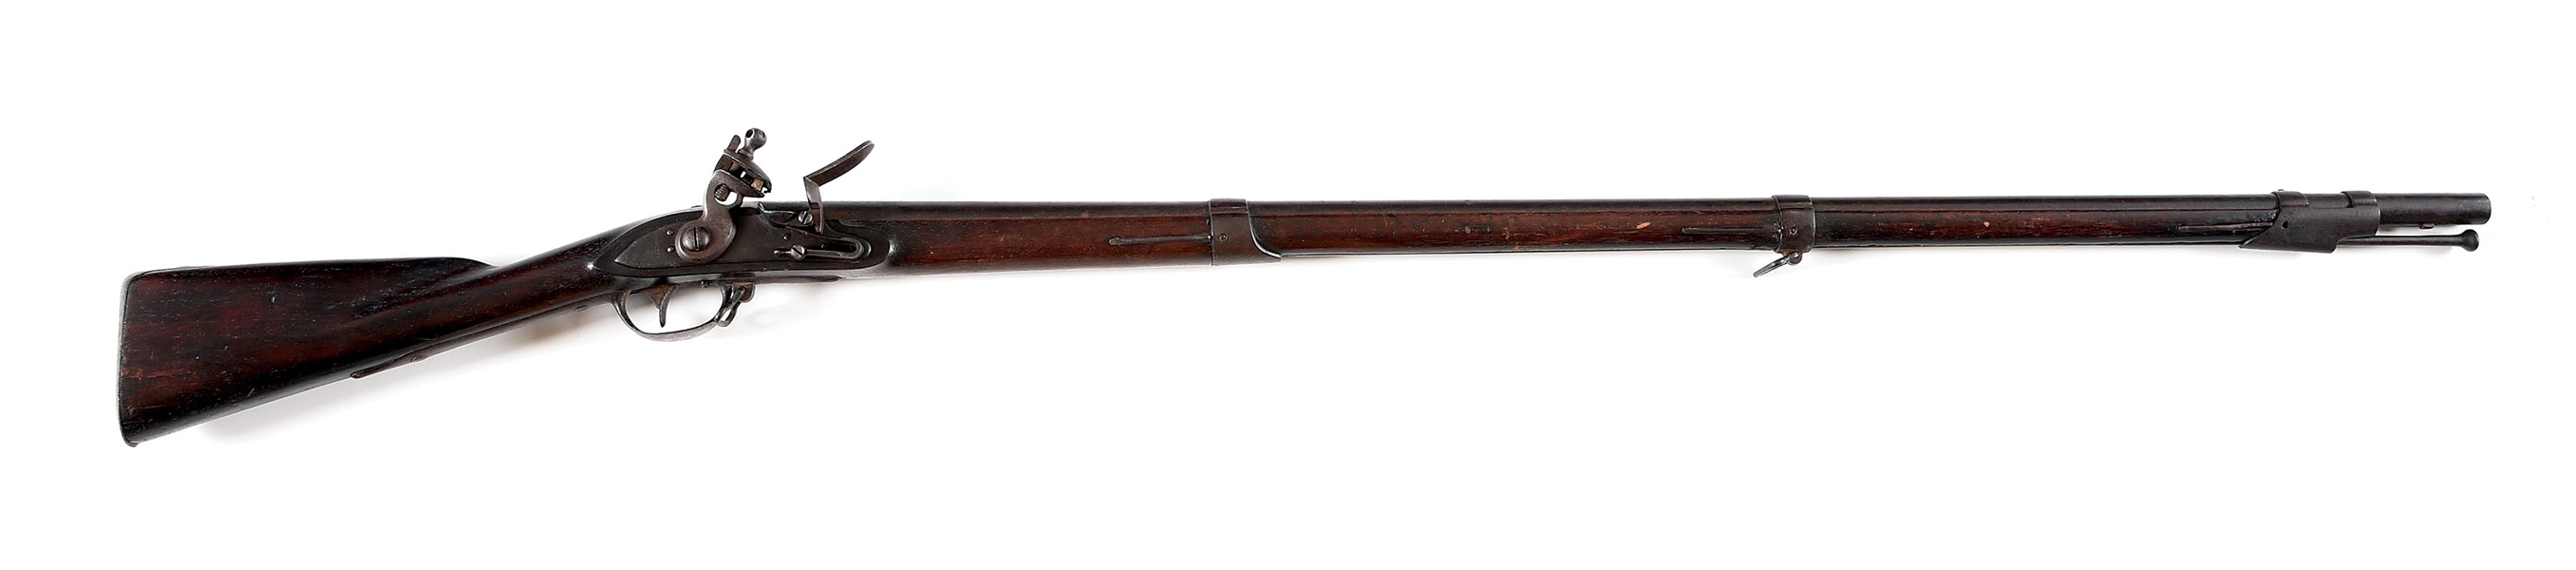 (A) SCARCE HASLETT MARKED MODEL 1797 VIRGINIA CONTRACT FLINTLOCK MUSKET WITH PERIOD HASLETT SIGNED DOCUMENT.